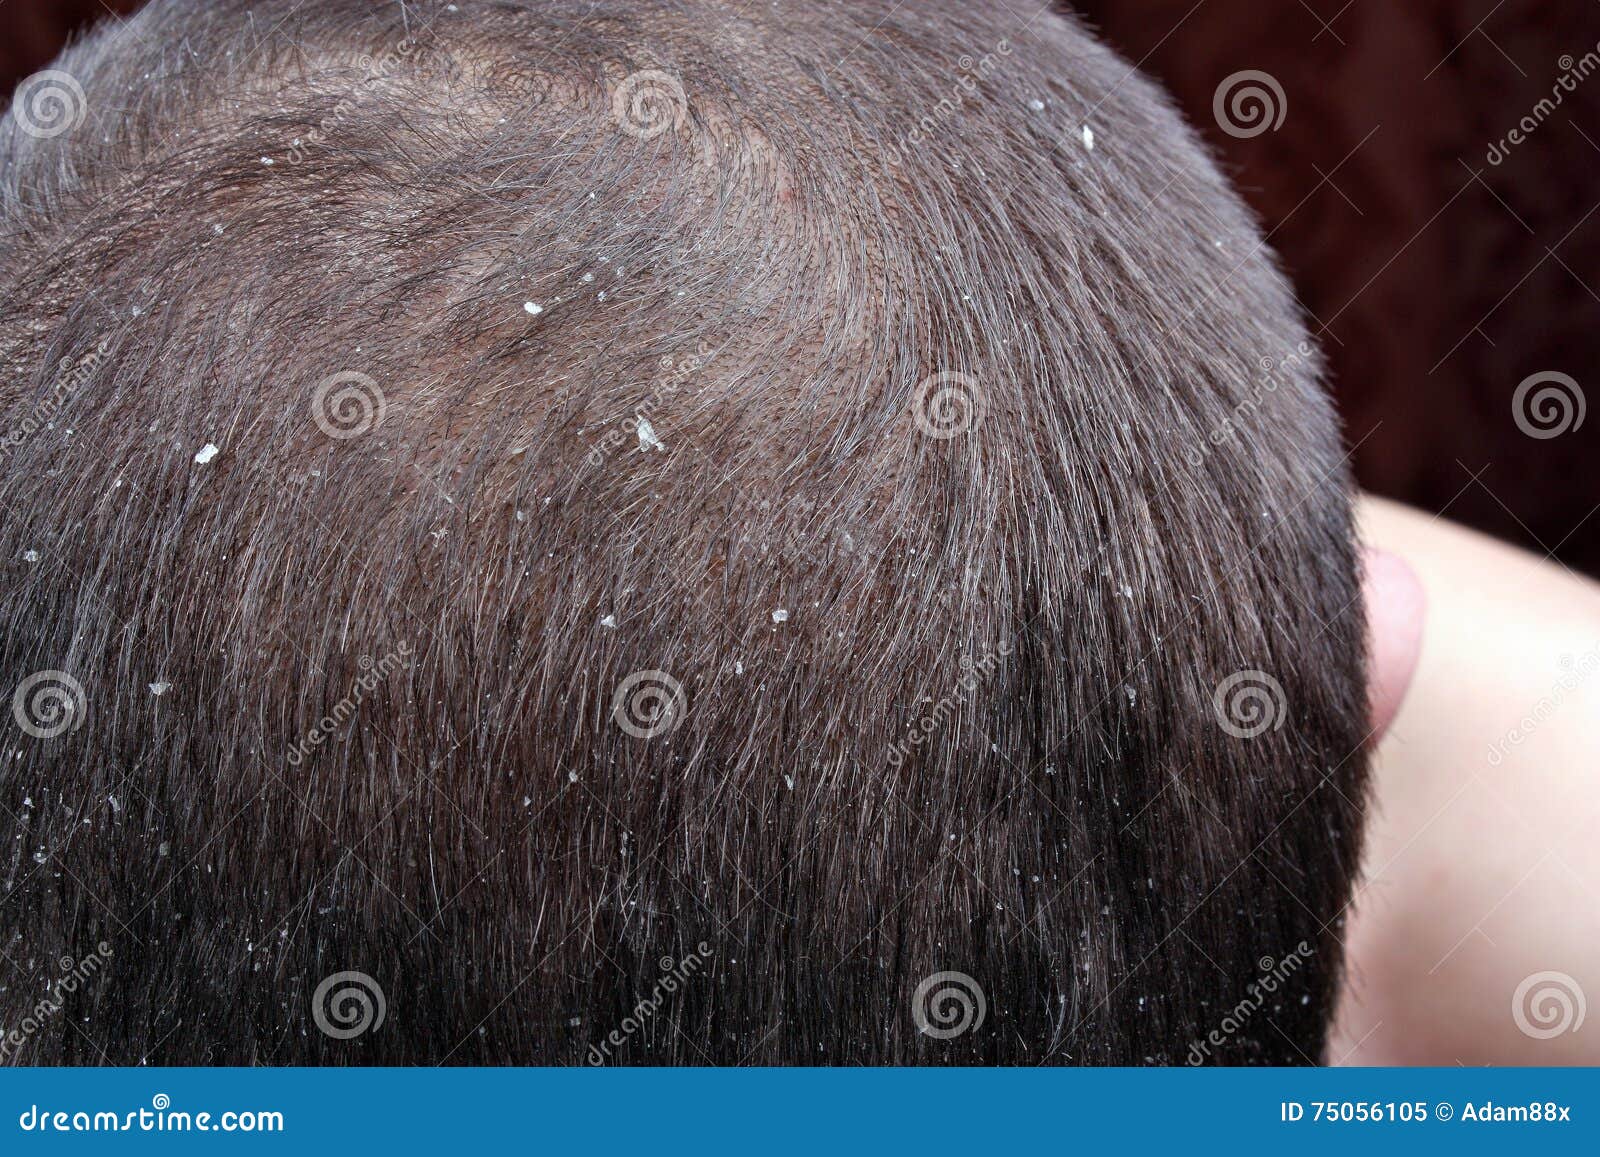 Dandruff In The Hair Stock Image Image Of Disease Problem 75056105